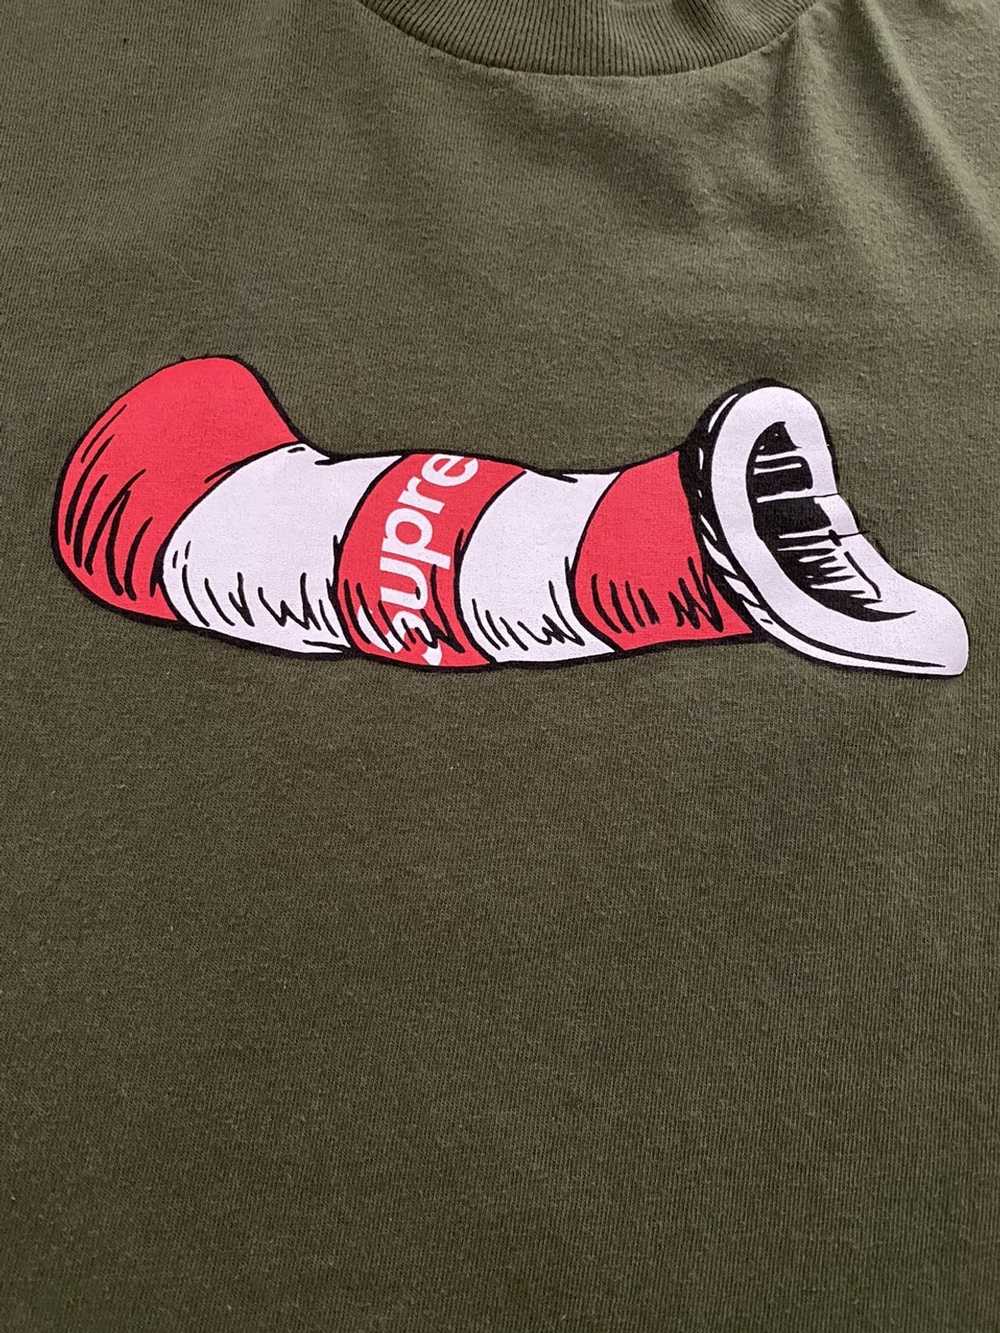 Supreme Supreme Cat in the Hat Olive Tee M - image 2